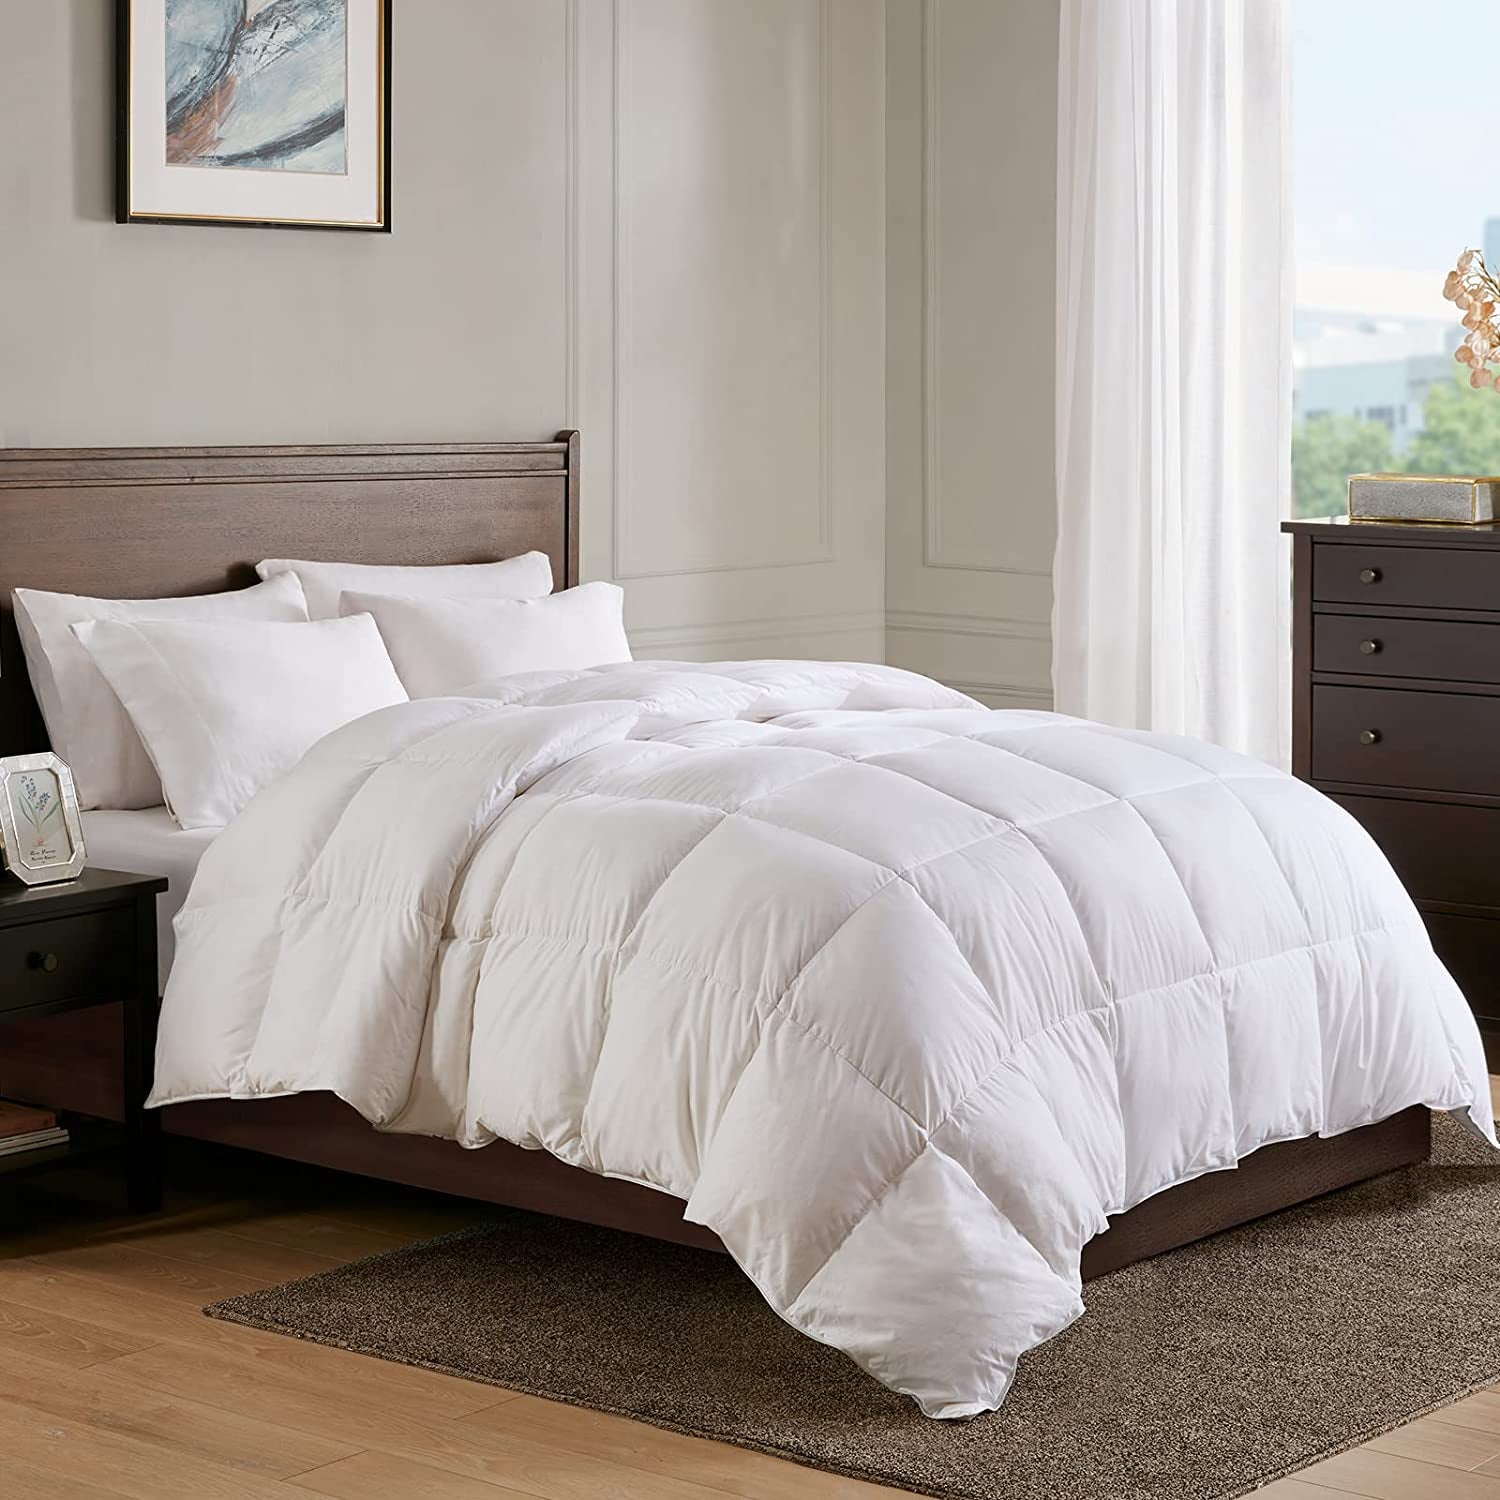 Heavyweight Goose Feather down Comforter California King Size - Ultra-Soft Luxury 750 Fill-Power Hotel-Style Thicker Winter Duvet Insert for Colder Weather/Sleeper (104X96, White)